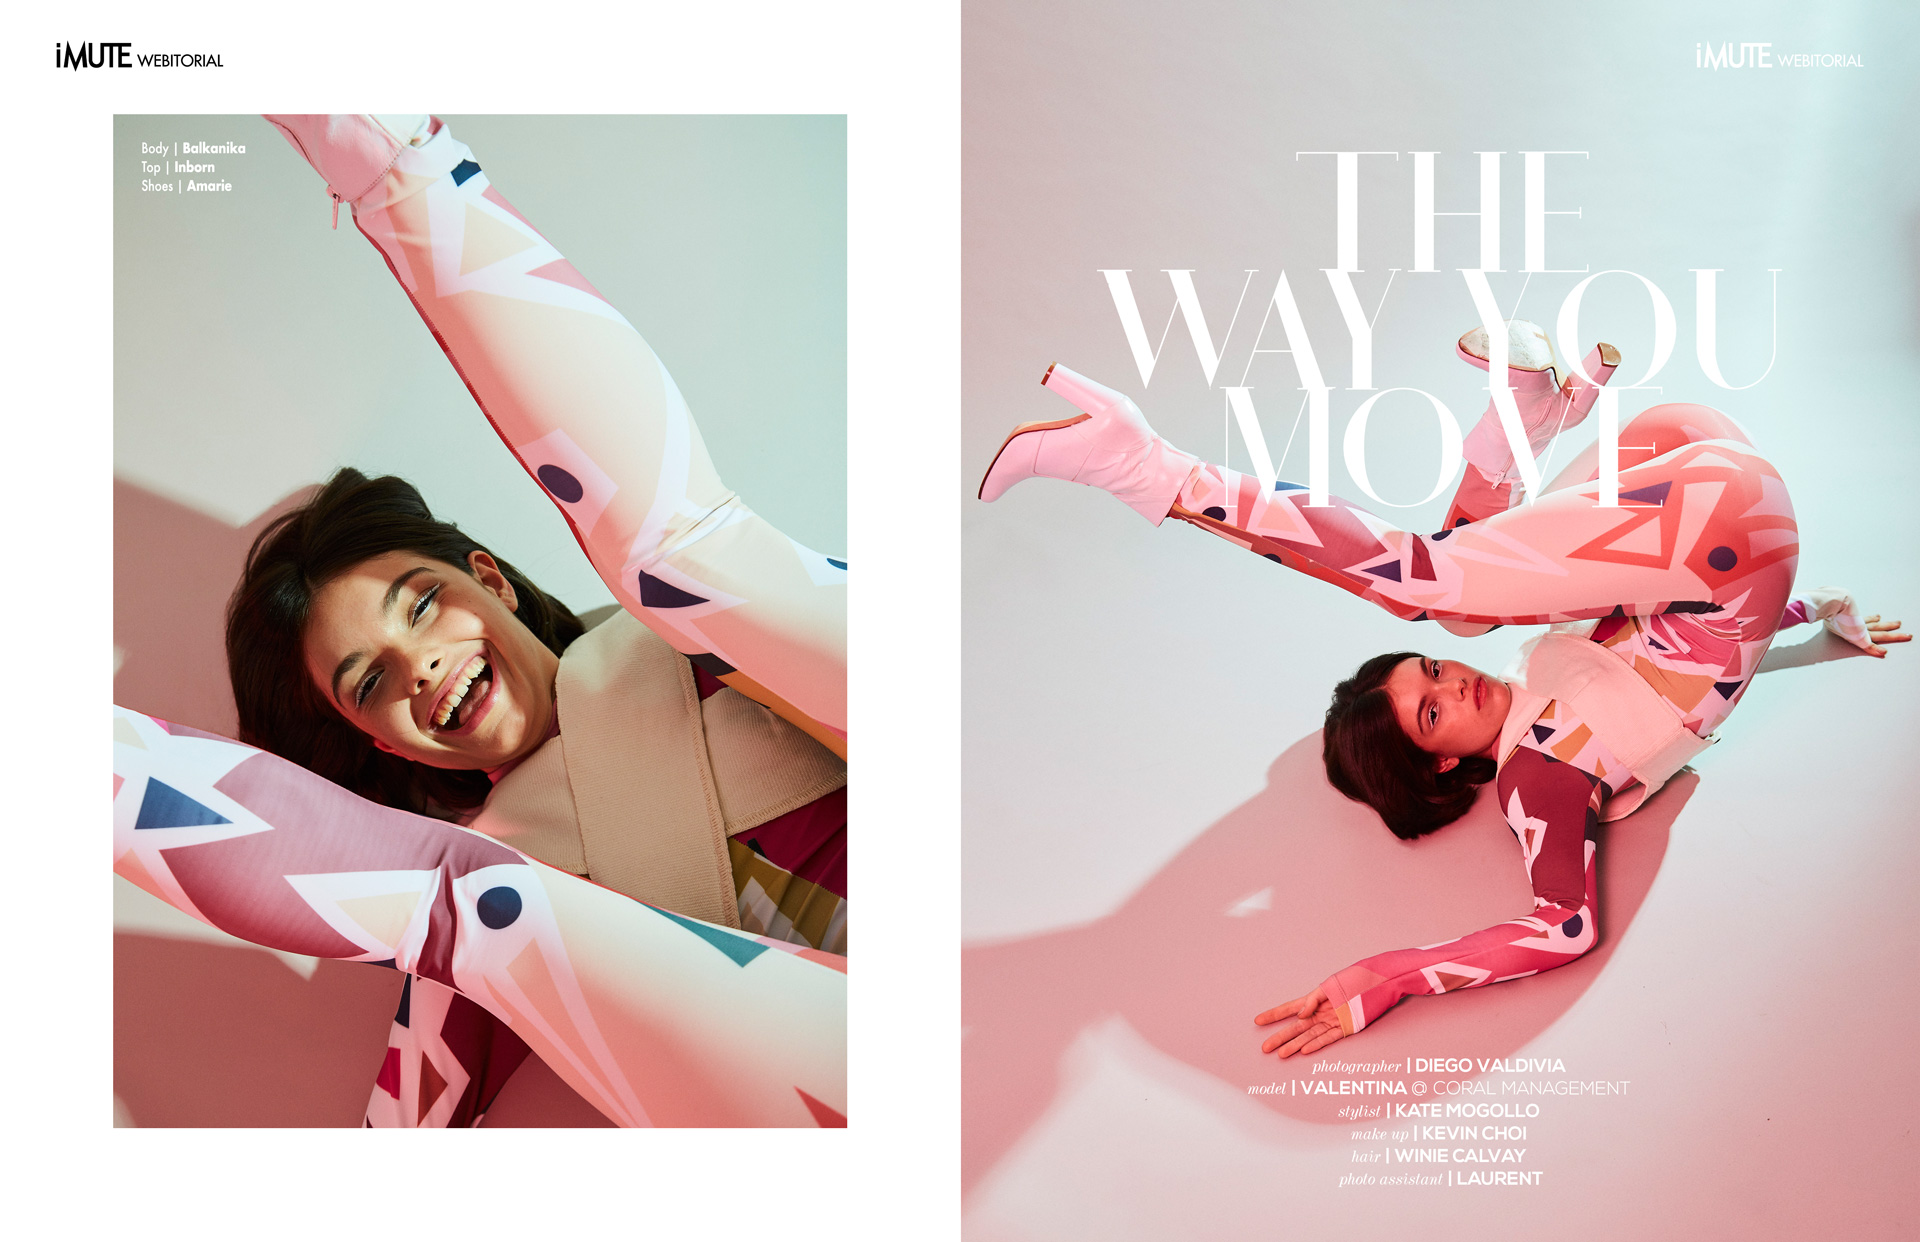 THE WAY YOU MOVE webitorial for iMute Magazine PHOTOGRAPHER | DIEGO VALDIVIA MODEL | VALENTINA @ CÓRAL MANAGEMENT STYLIST | KATE MOGOLLO MAKEUP | KEVIN CHOI HAIR | WINIE CALVAY PHOTO ASSISTANT | LAURENT